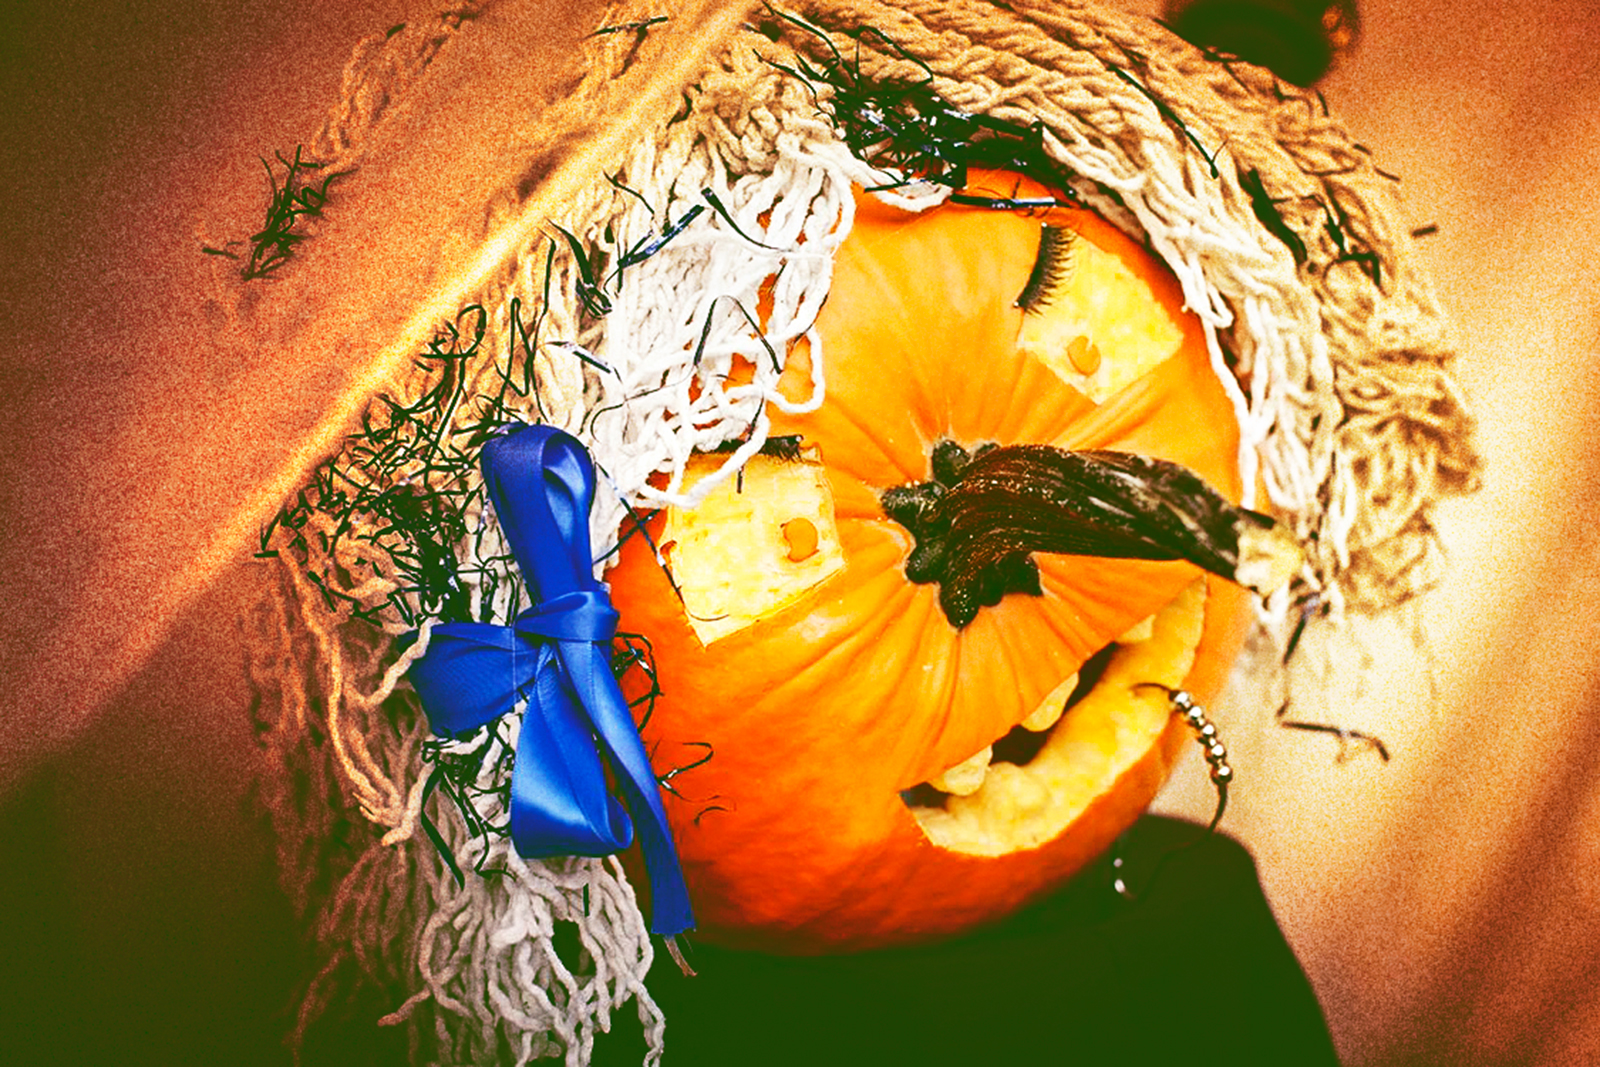 Scary carved pumpkin